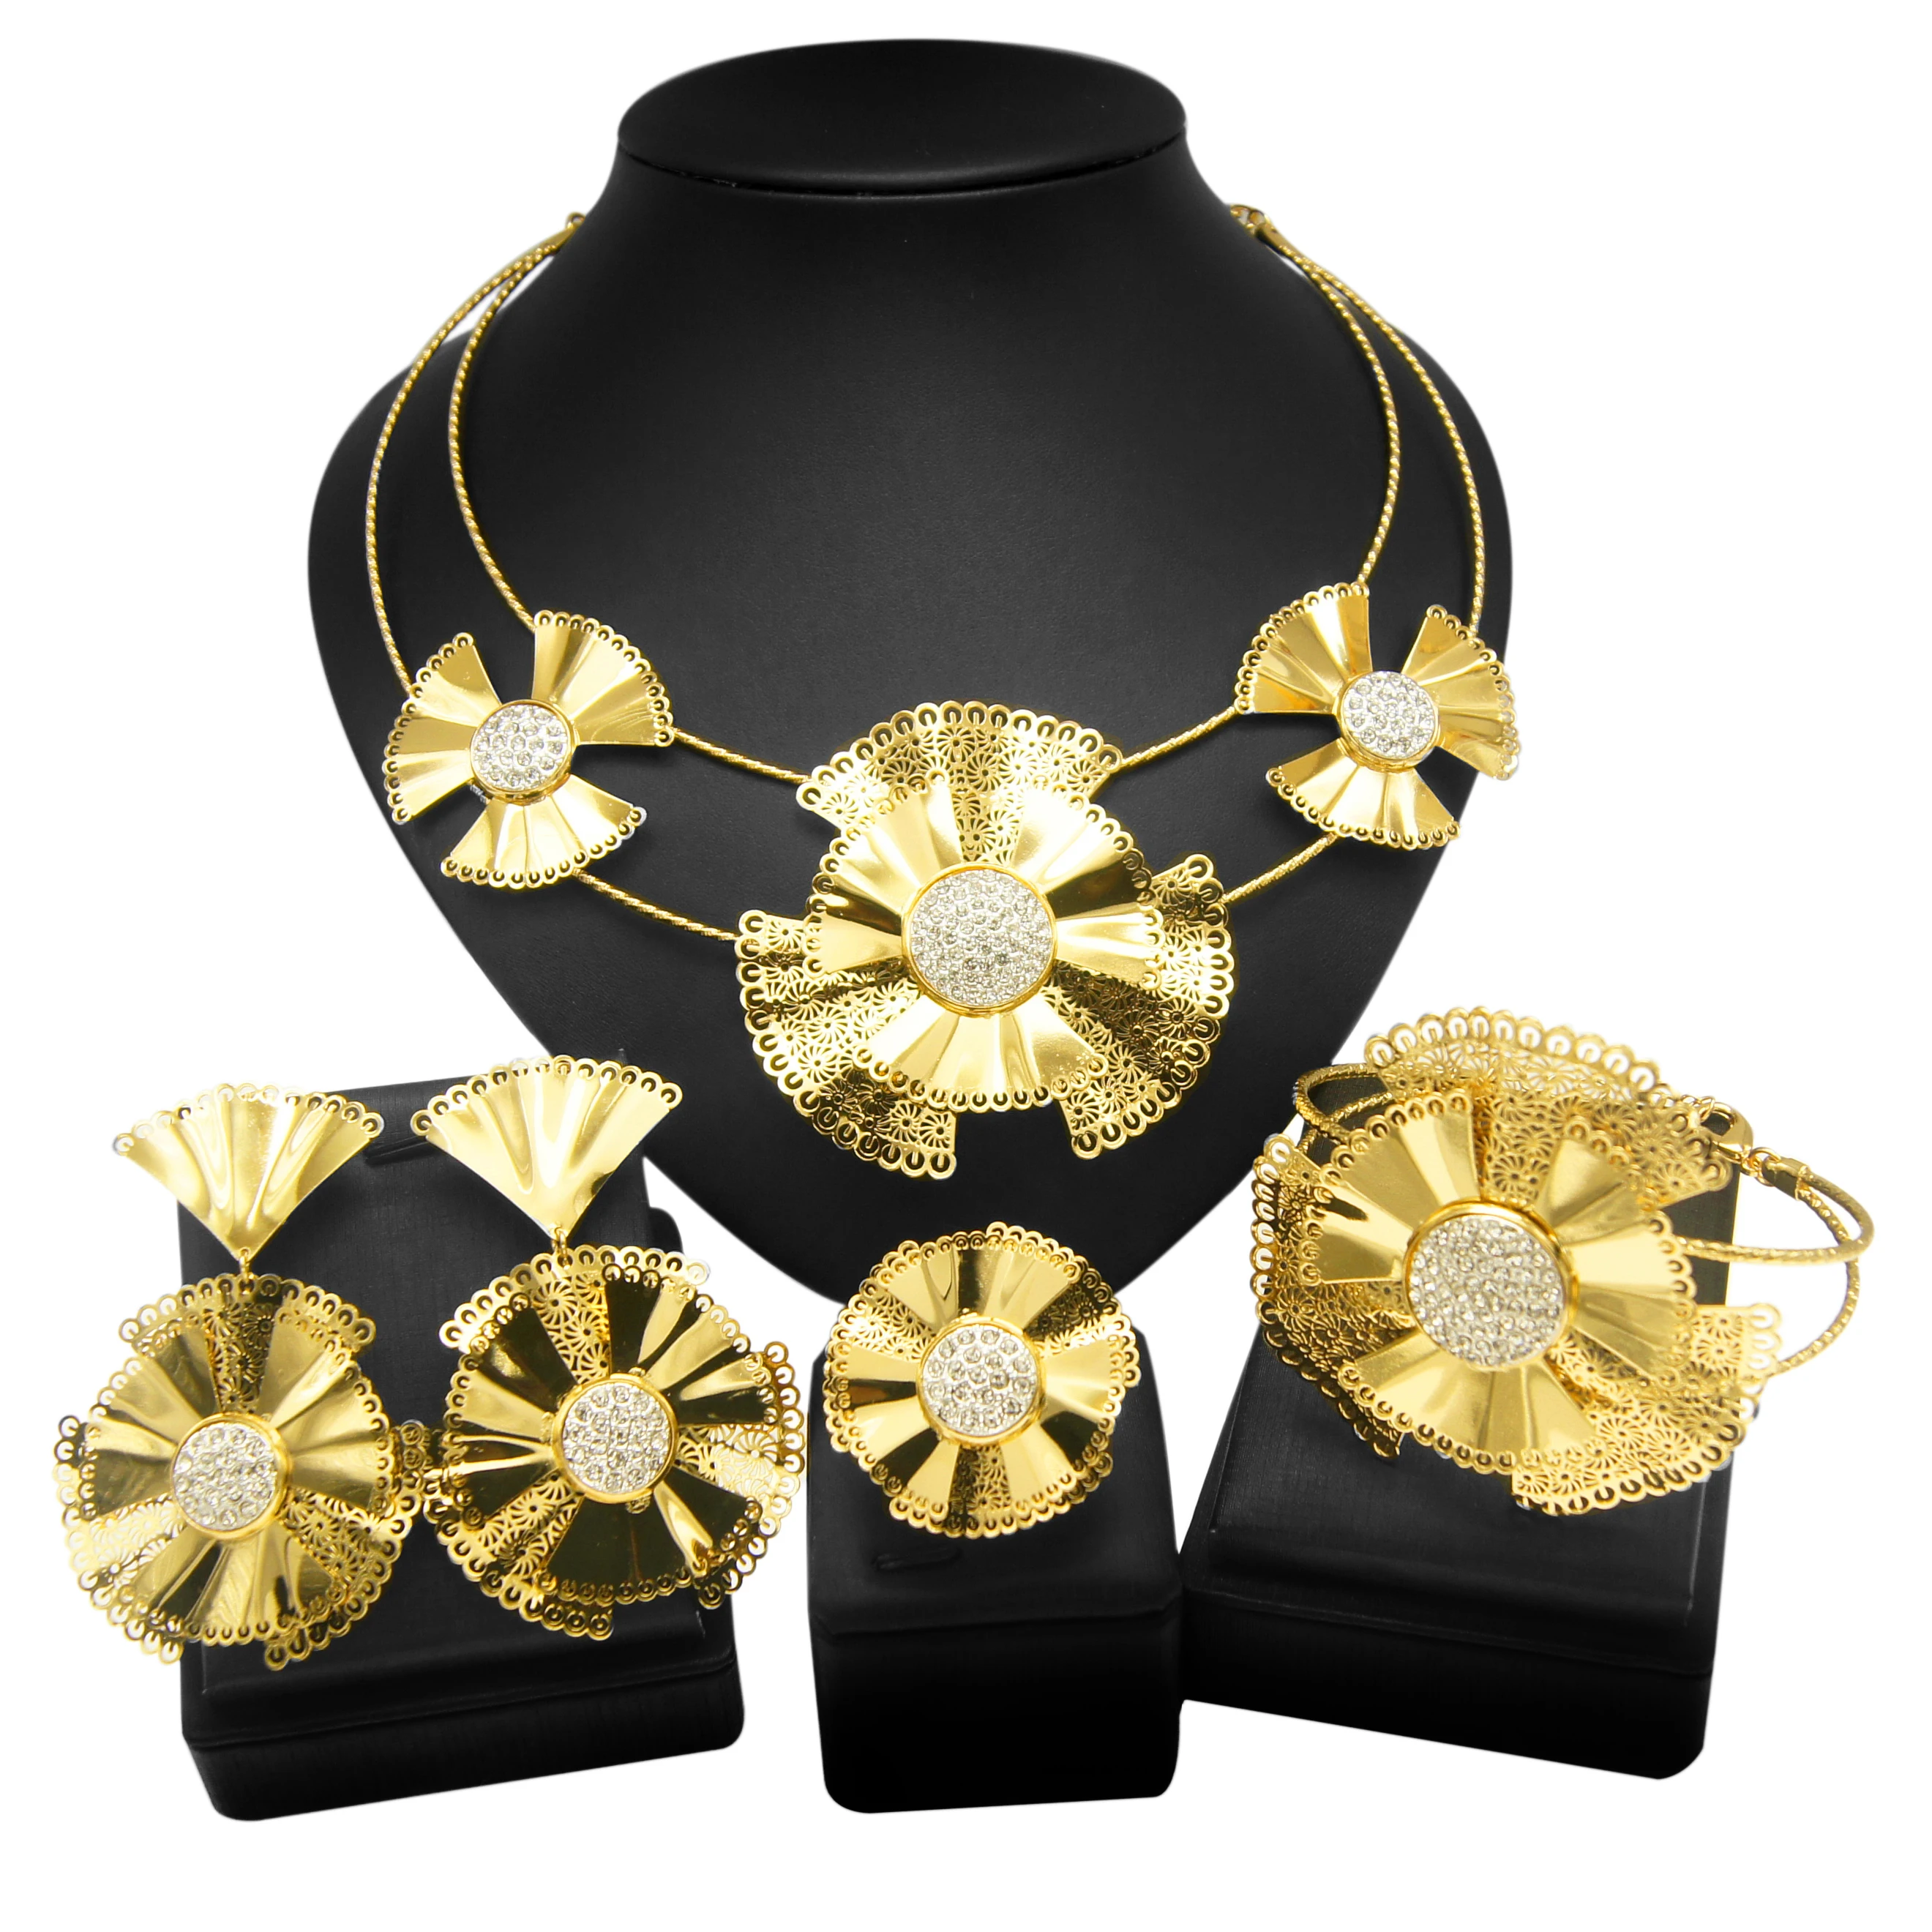 

Yulaili Hot Sale High Quality Brass Material Round Flower Pattern Jewelry Set and Female Dating Bajin Luxury Style Jewelry Sets